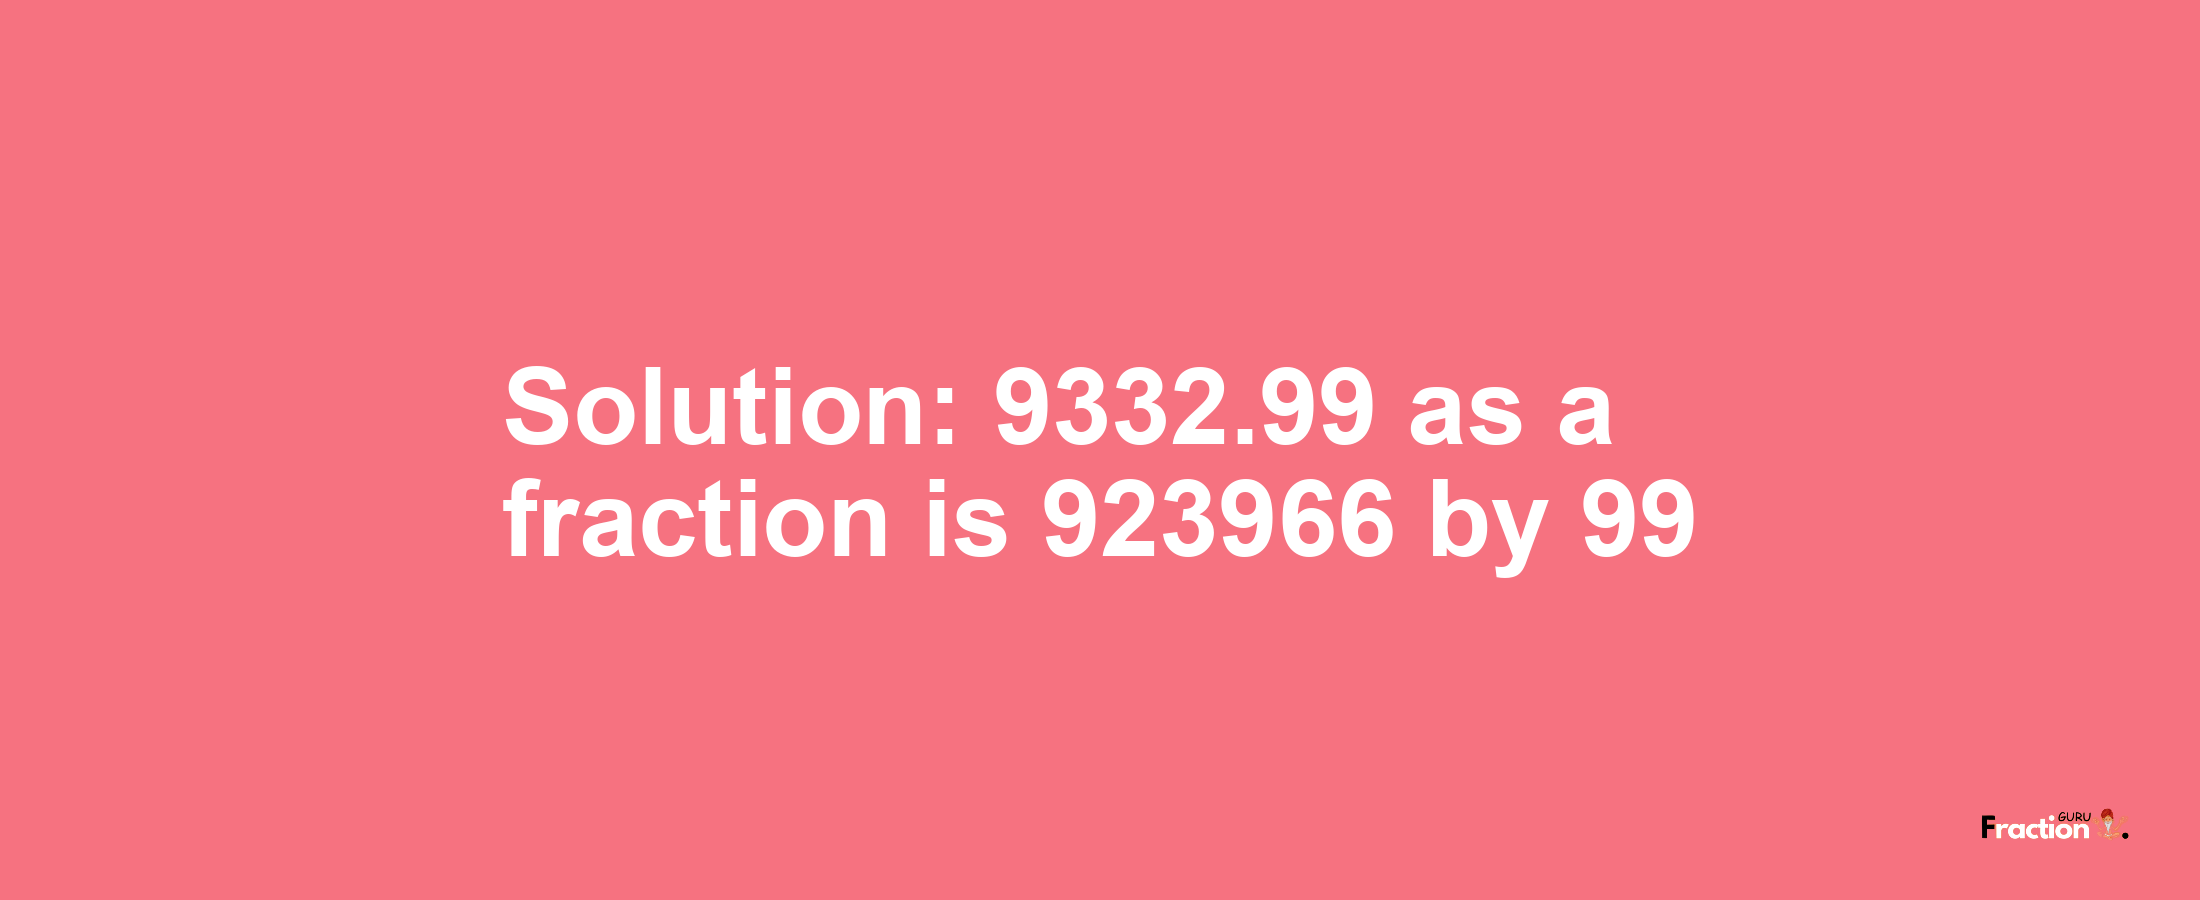 Solution:9332.99 as a fraction is 923966/99